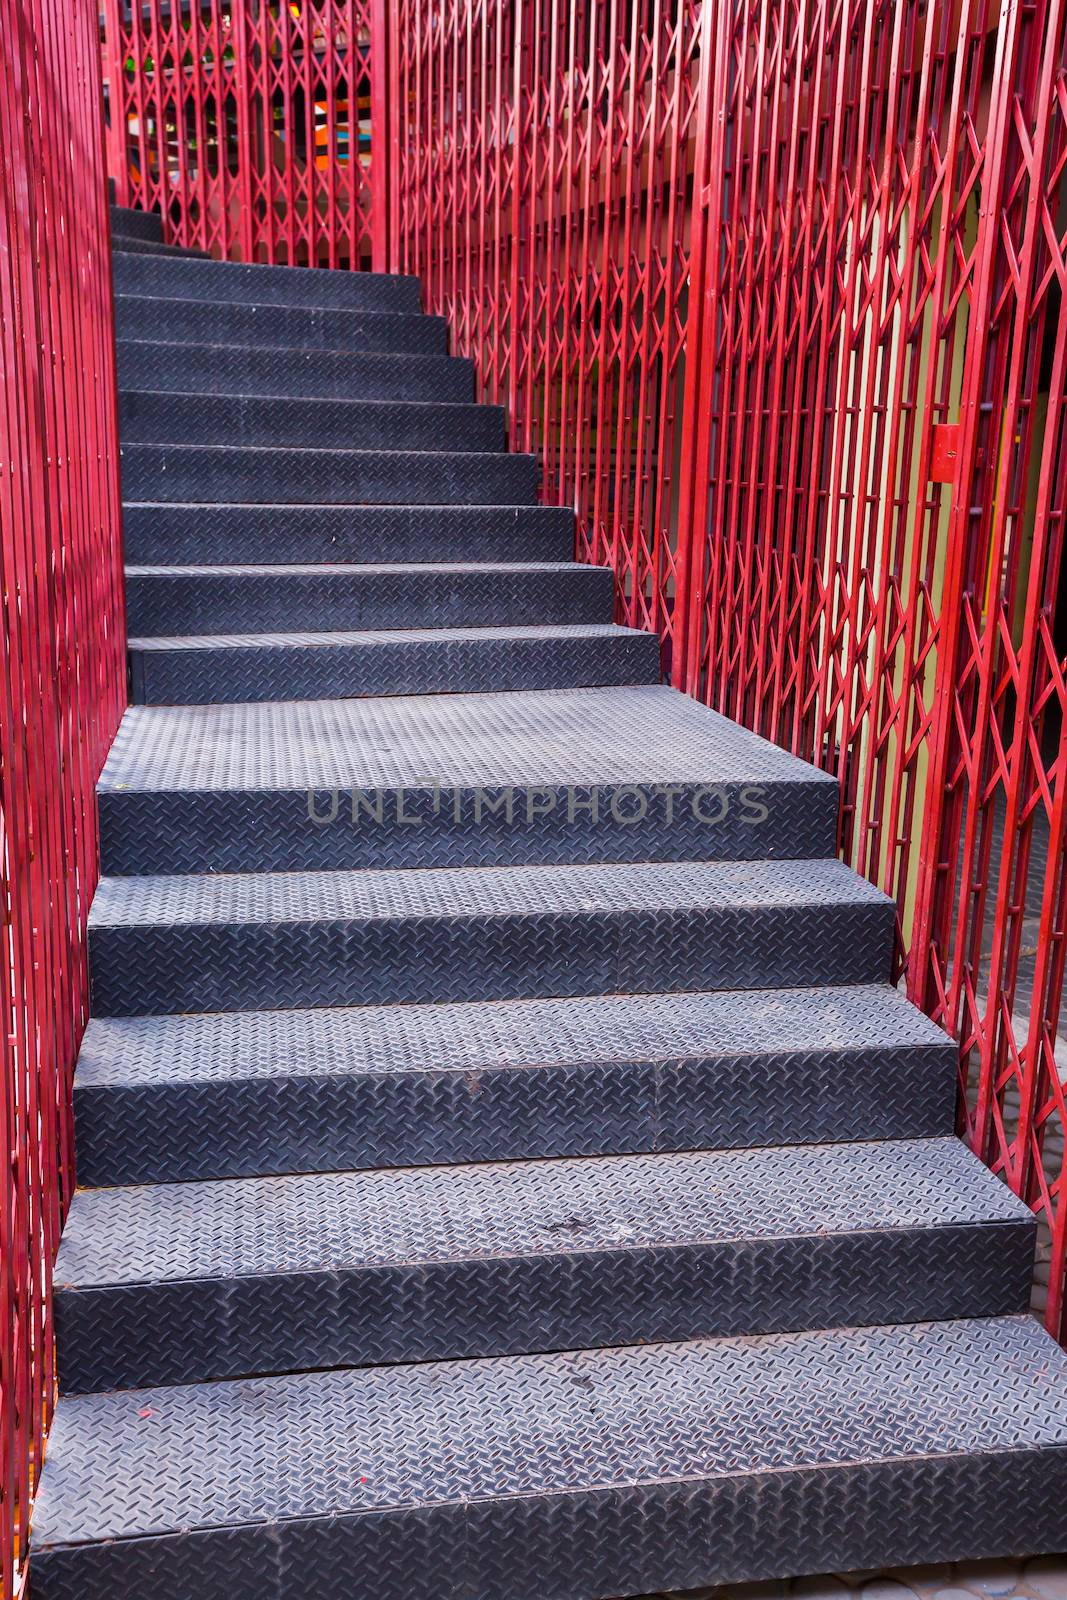 Black iron sheet staircase and red iron fence 